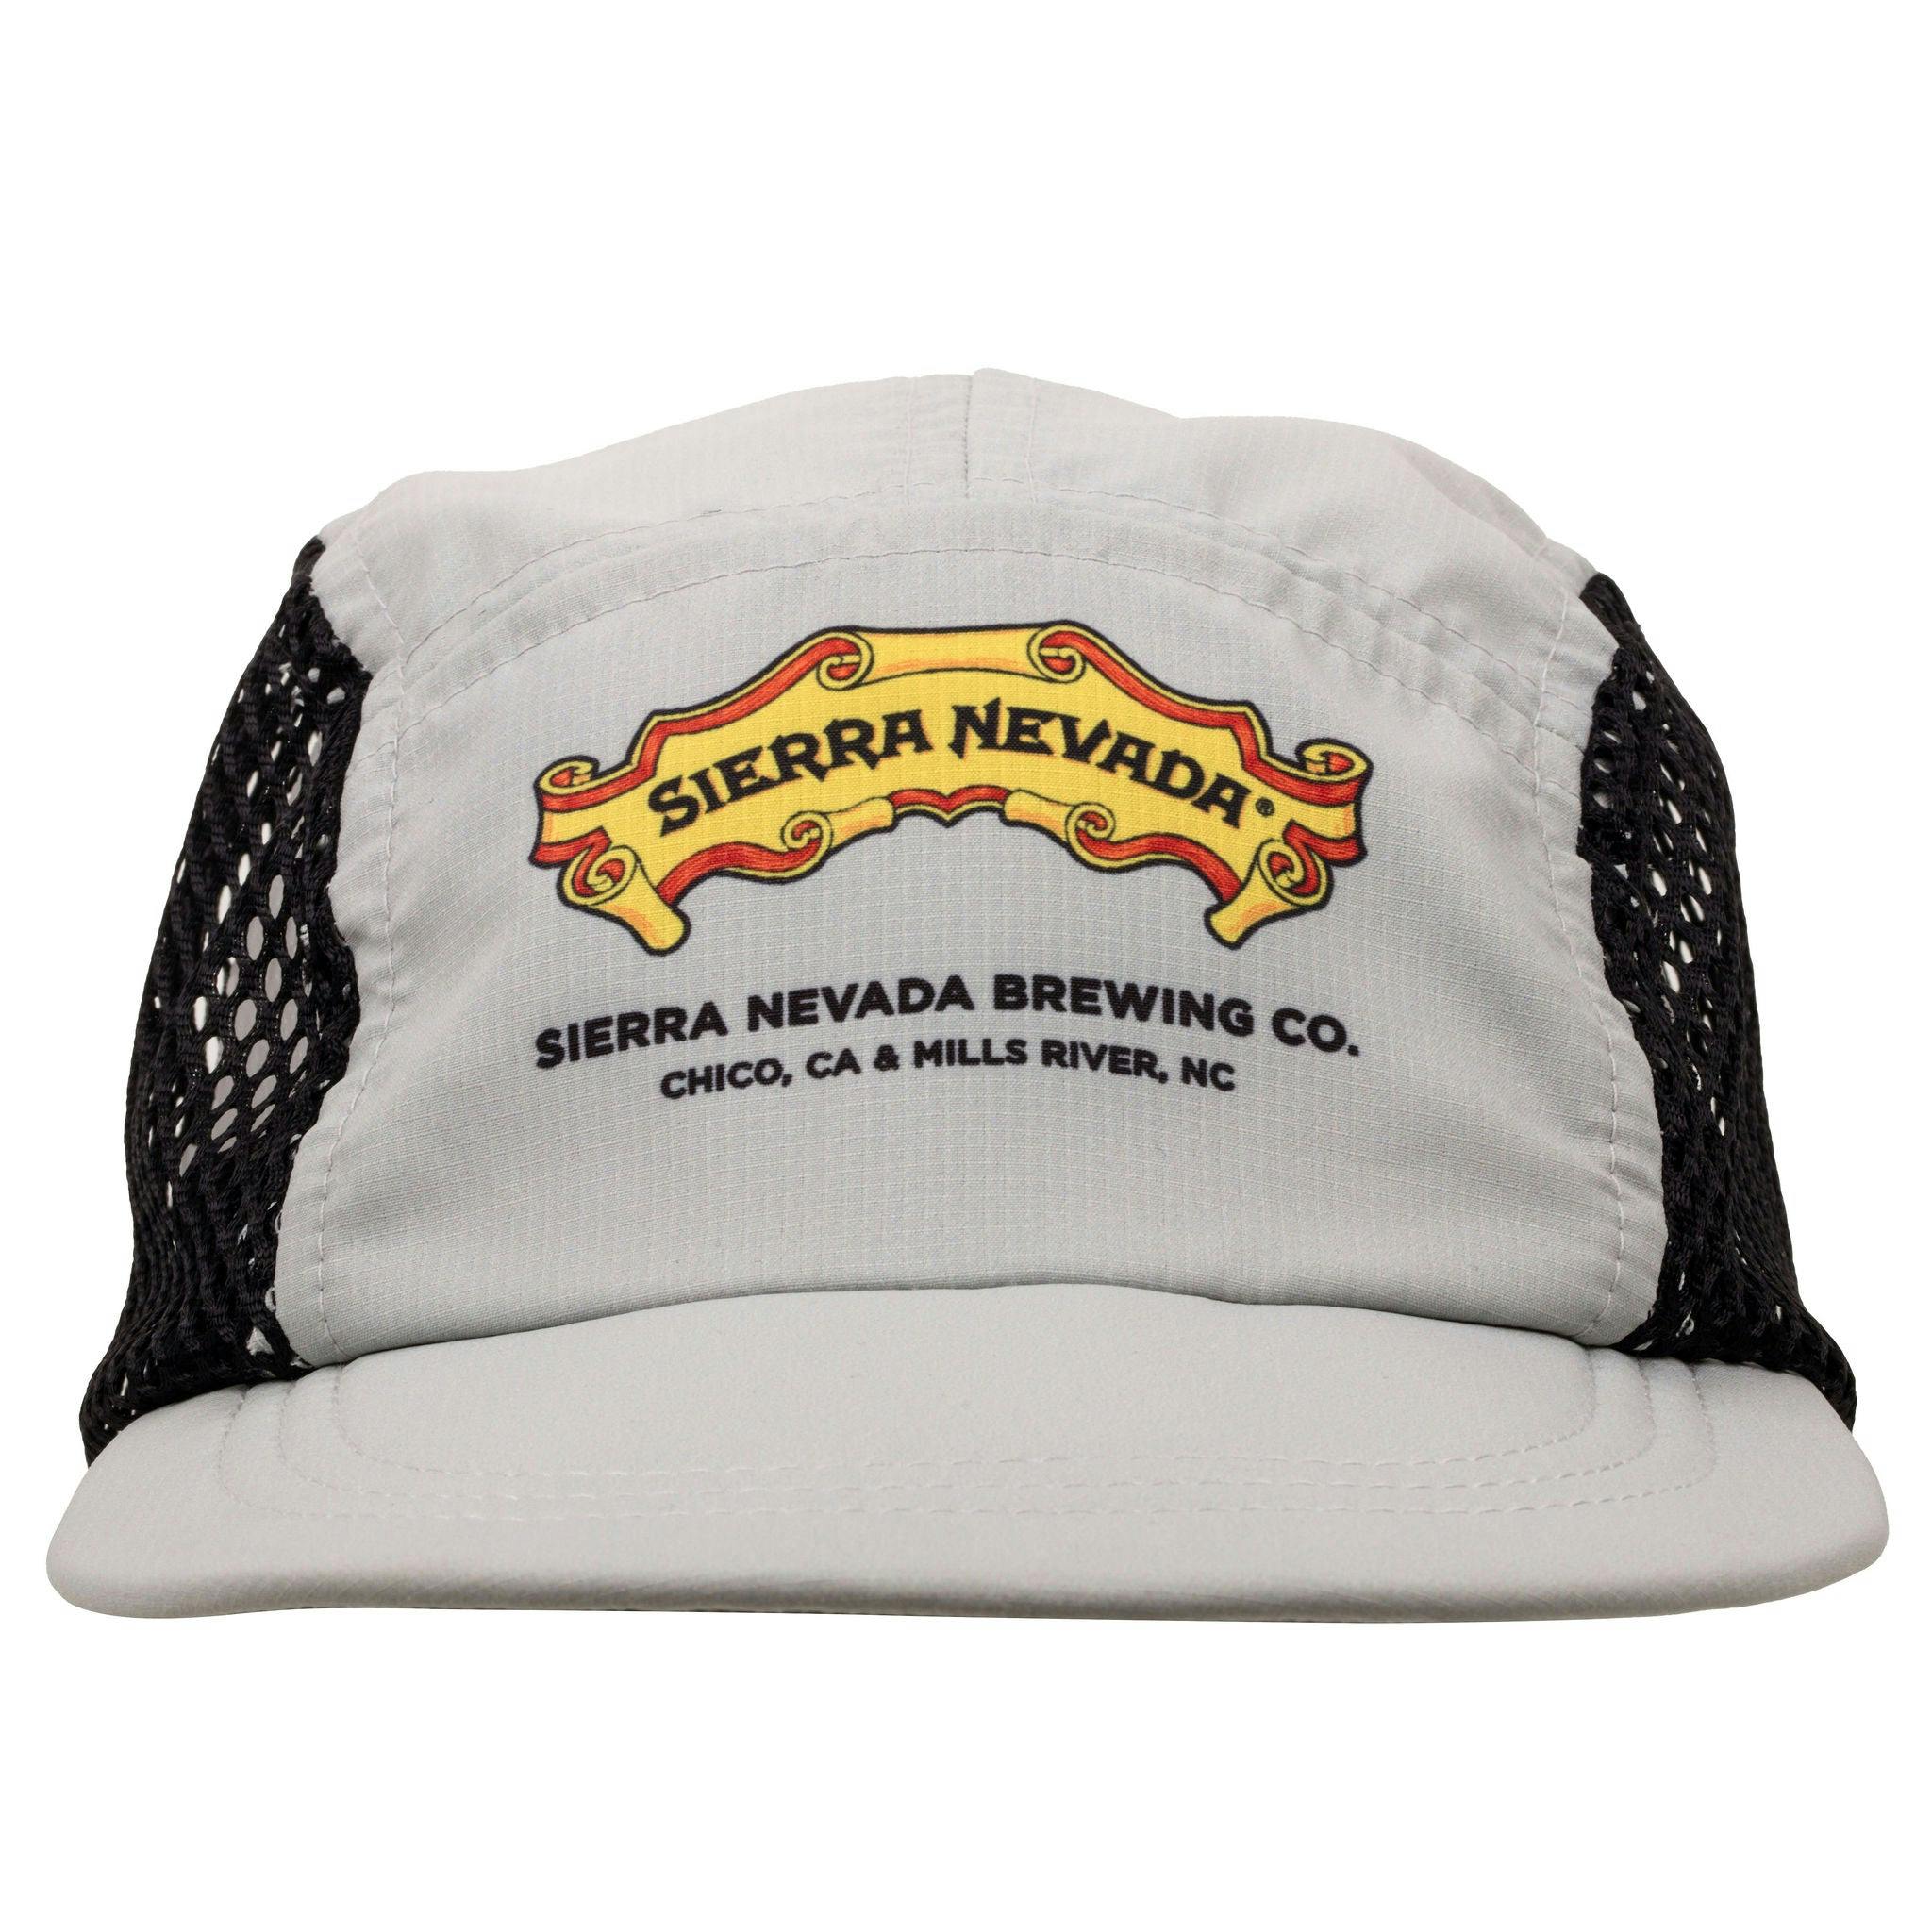 Sierra Nevada Brewing Co. Camper Hat - front view featuring the printed Sierra Nevada scroll logo